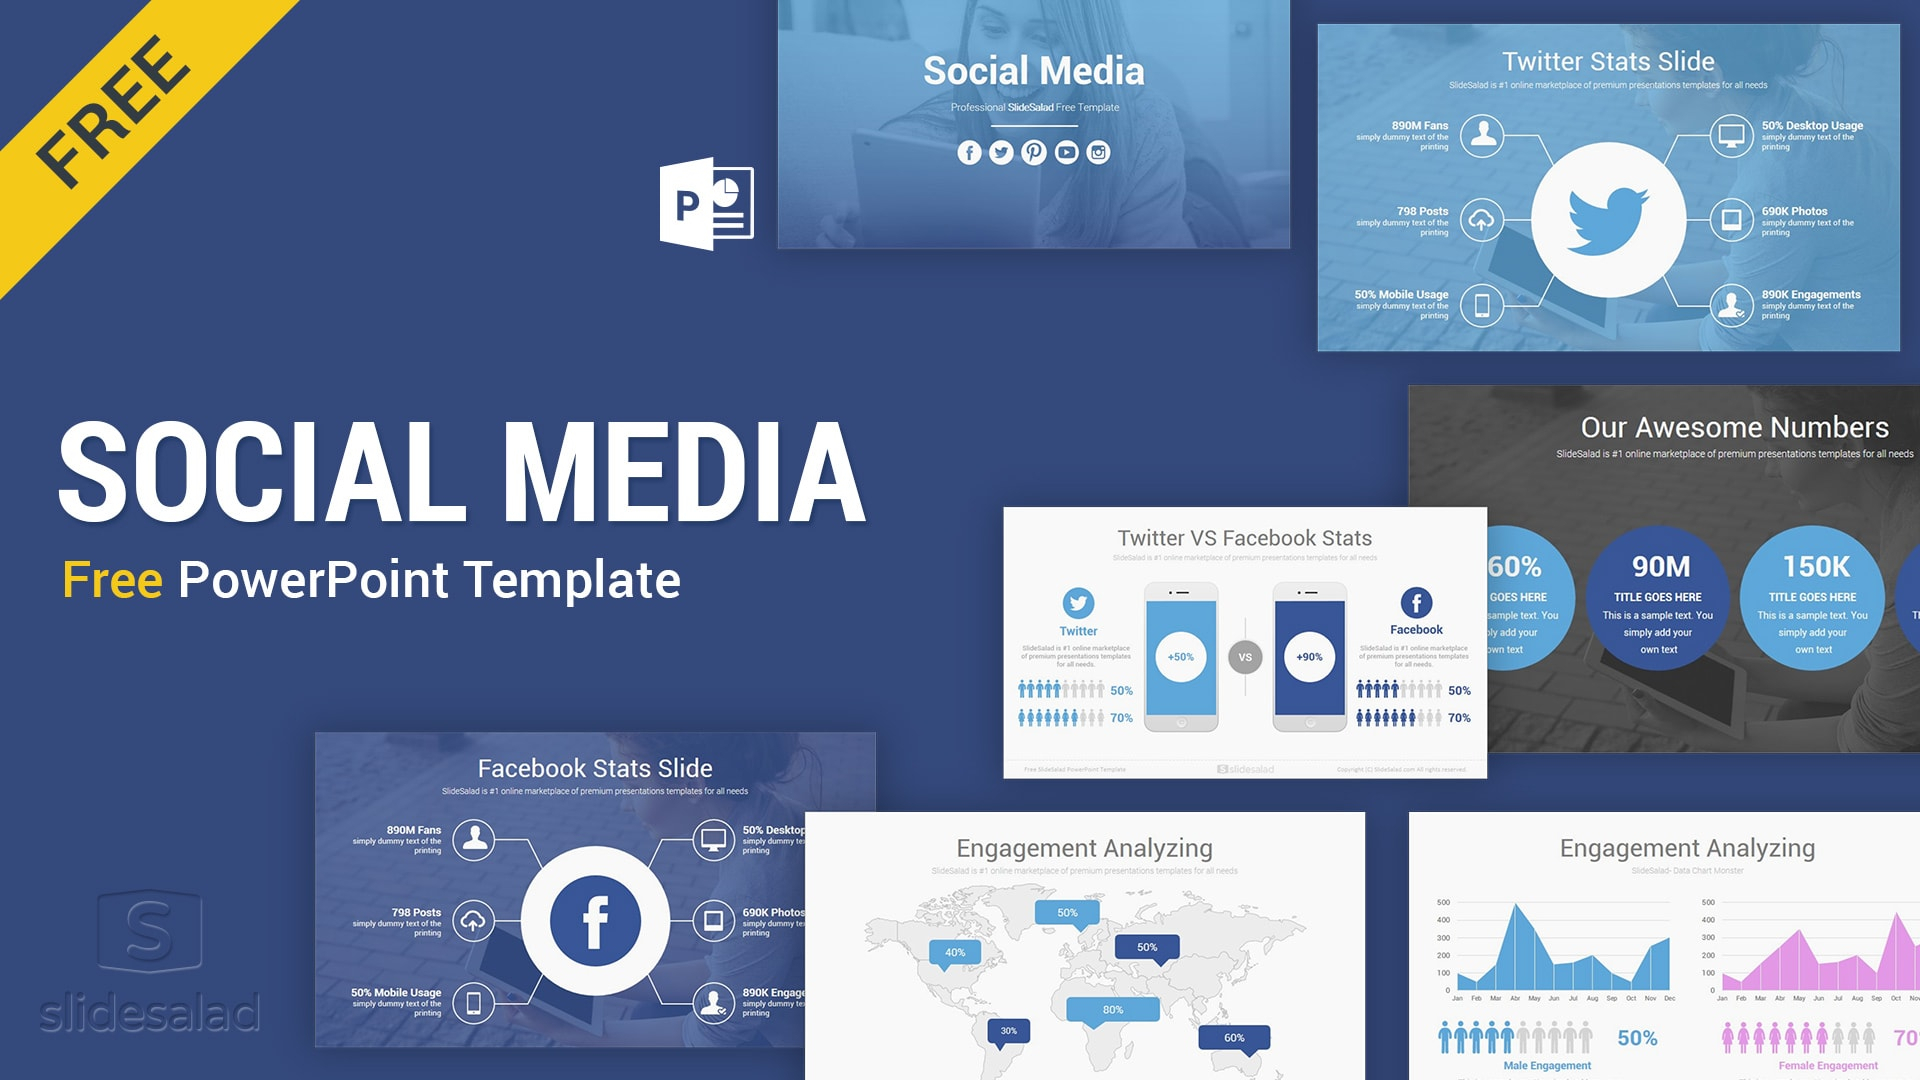 Social Media Free Powerpoint Template Ppt Slides – Slidesalad Within Raf Powerpoint Template